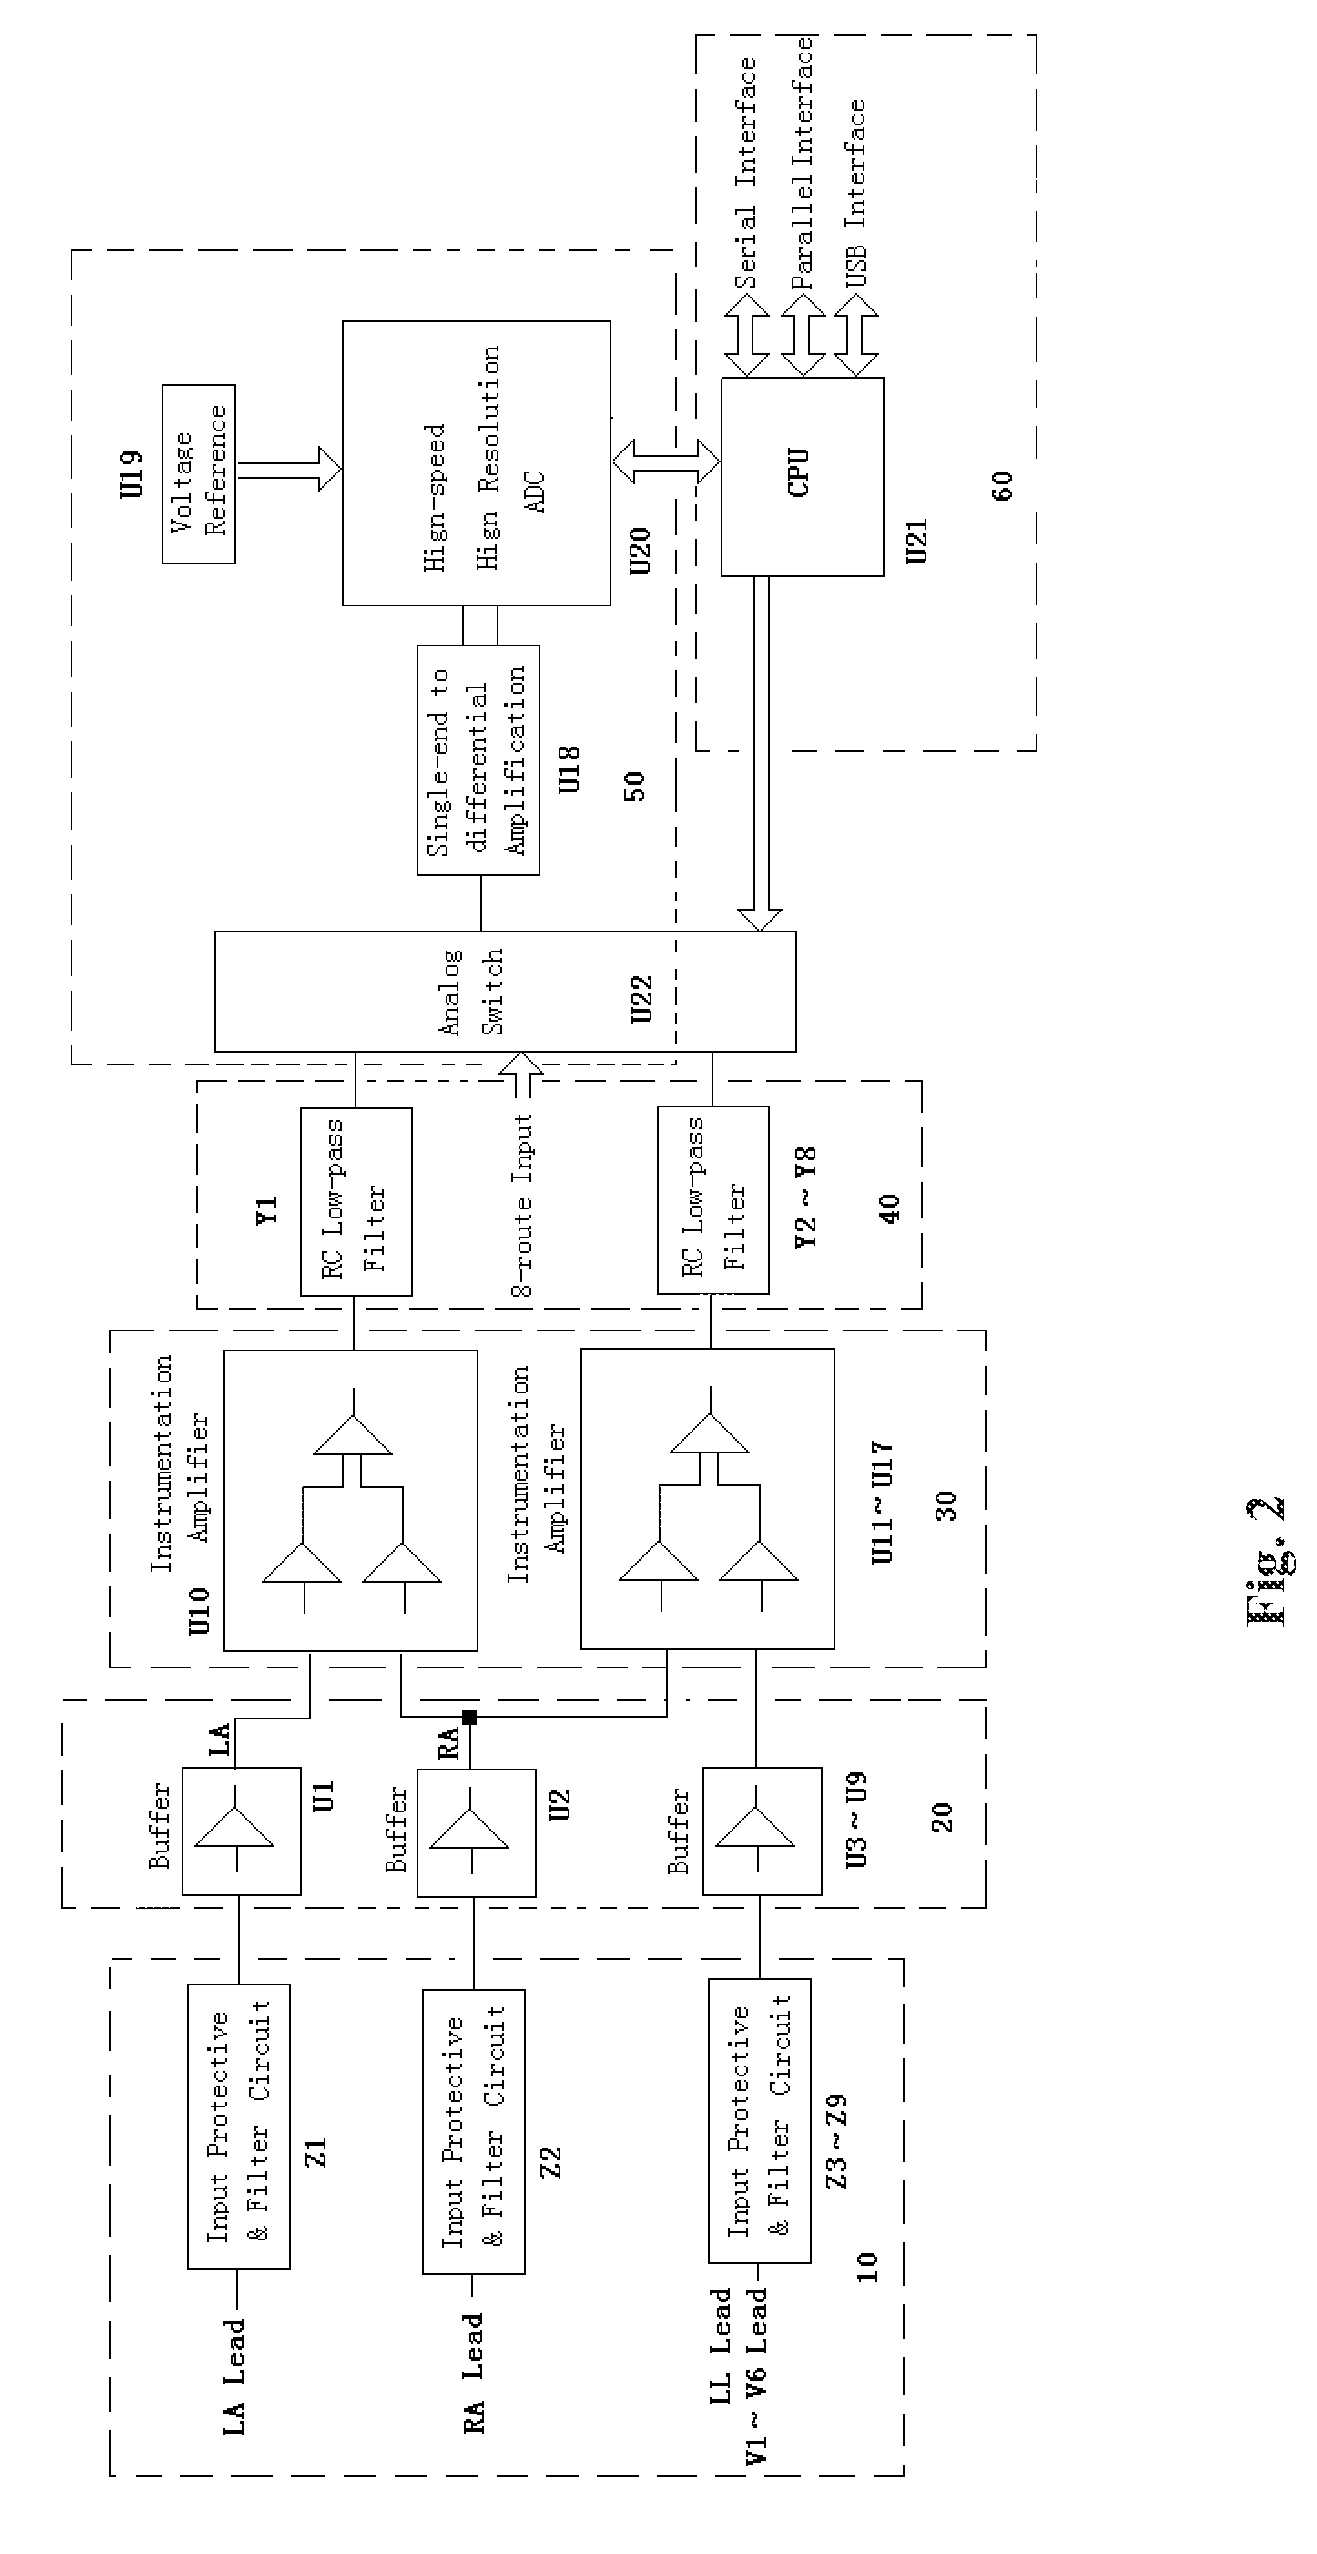 Type of High-Performance DC Amplification Device for Bioelectrical Signal Collection